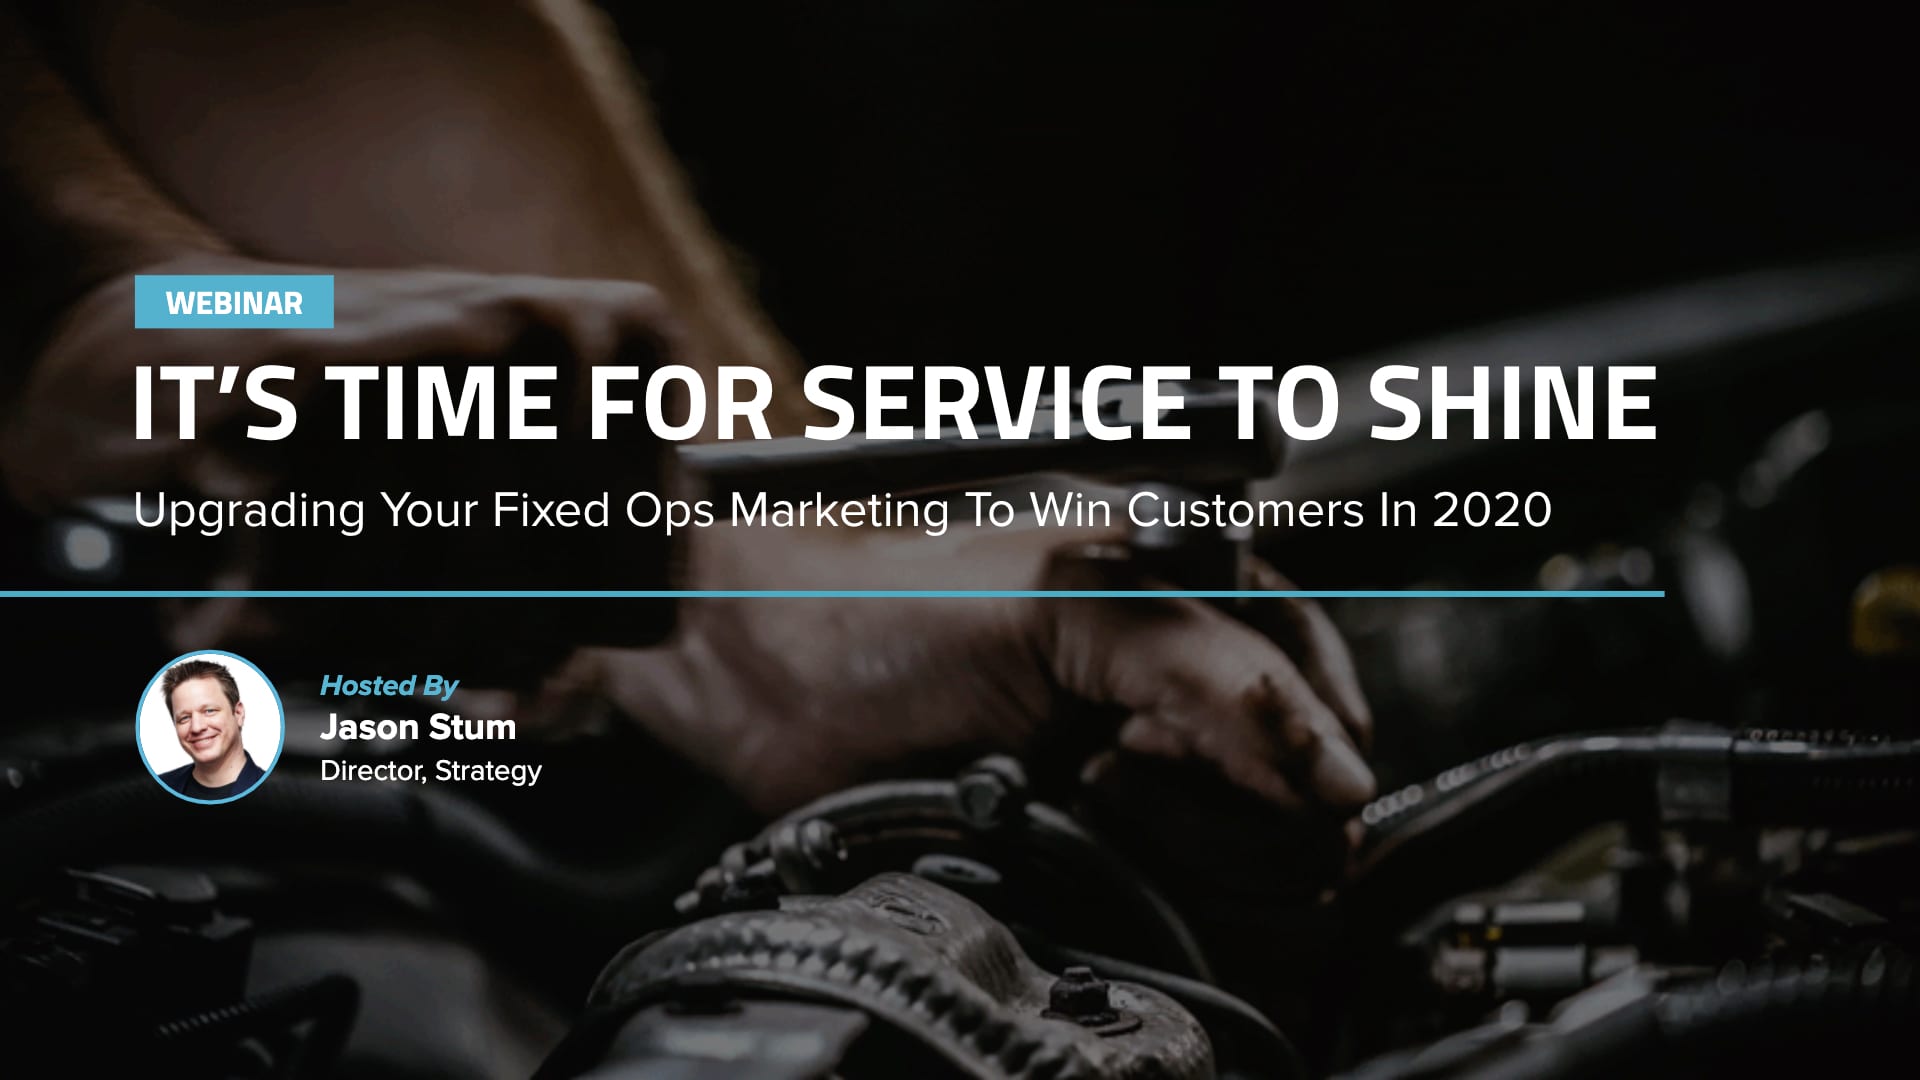 It's Time For Service to Shine - Upgrading Your Fixed Ops Marketing to Win Customers in 2020 Webinar by Dealer Inspire